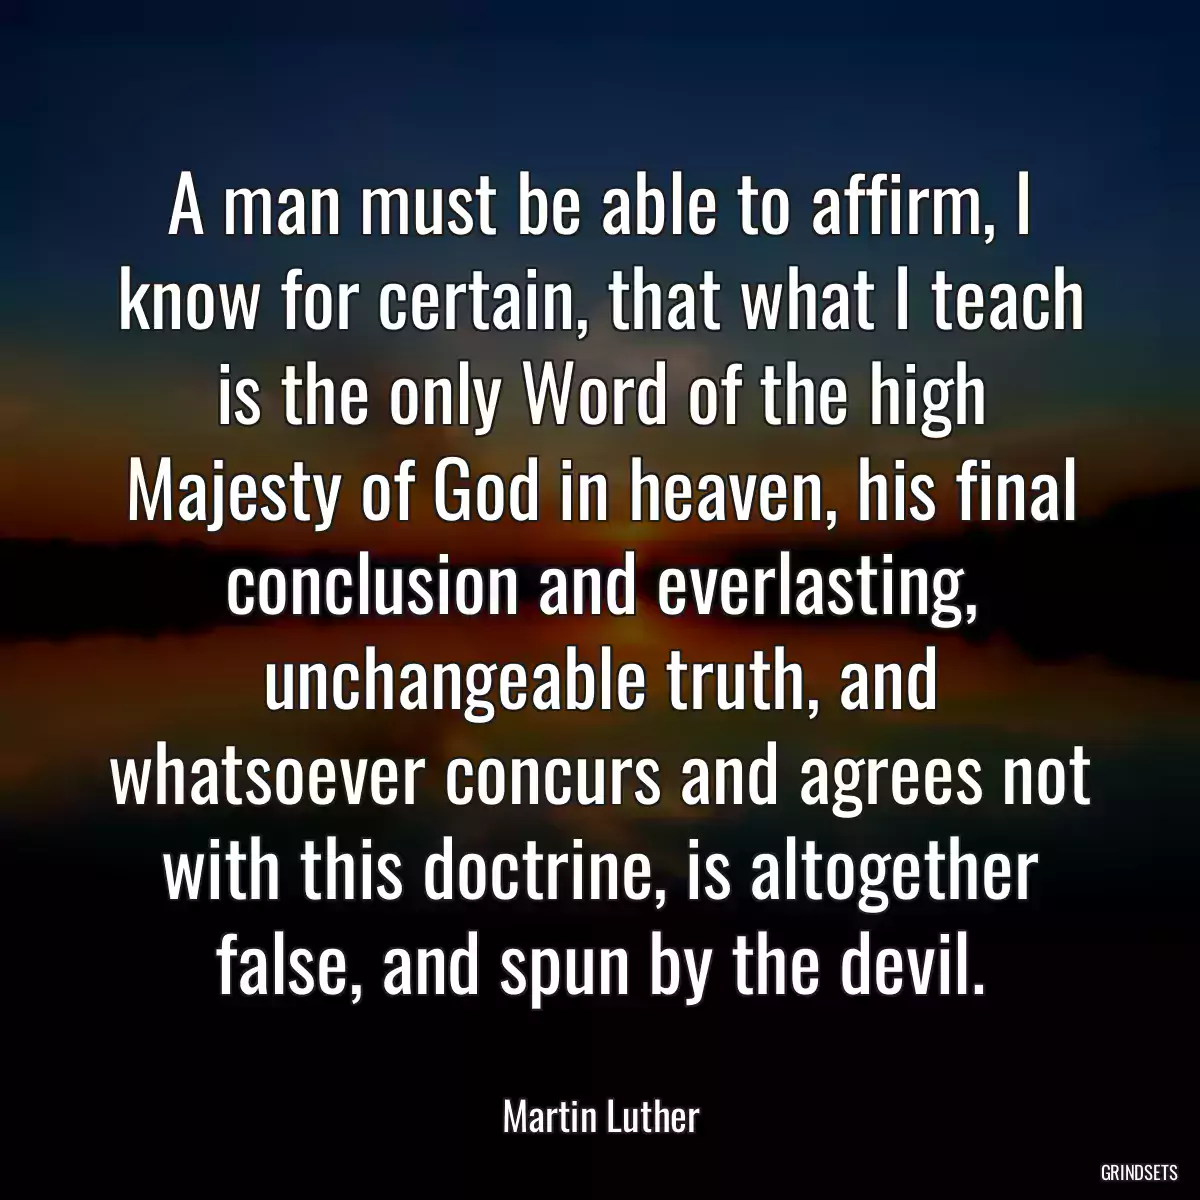 A man must be able to affirm, I know for certain, that what I teach is the only Word of the high Majesty of God in heaven, his final conclusion and everlasting, unchangeable truth, and whatsoever concurs and agrees not with this doctrine, is altogether false, and spun by the devil.